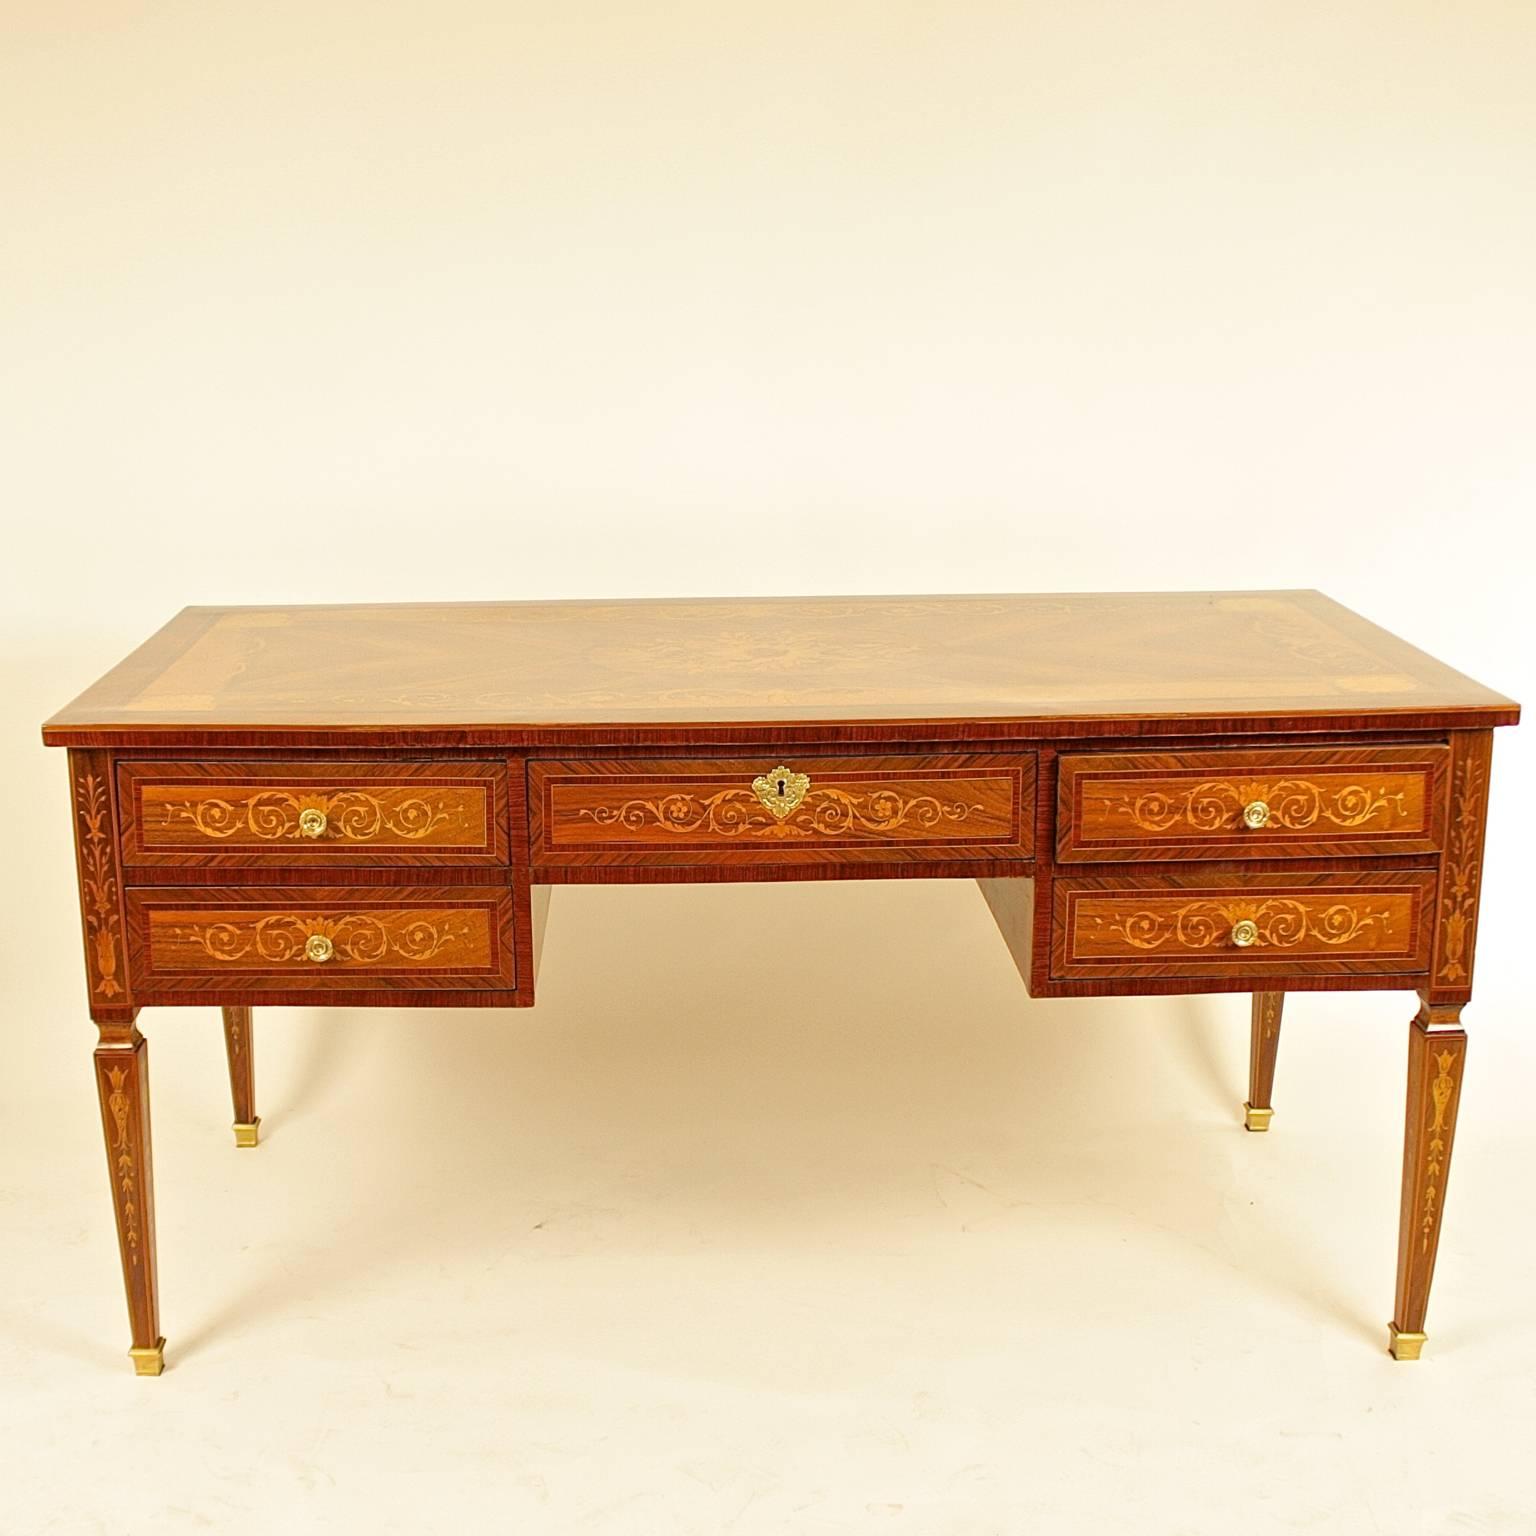 A freestanding writing table or bureau plat veneered in marquetry of fruitwood, walnut and other decorative woods, crossbanded in tulipwood. 
The rectangular quarter-veneered top centered by a foliate cartouche and corner cartouches, the kneehole